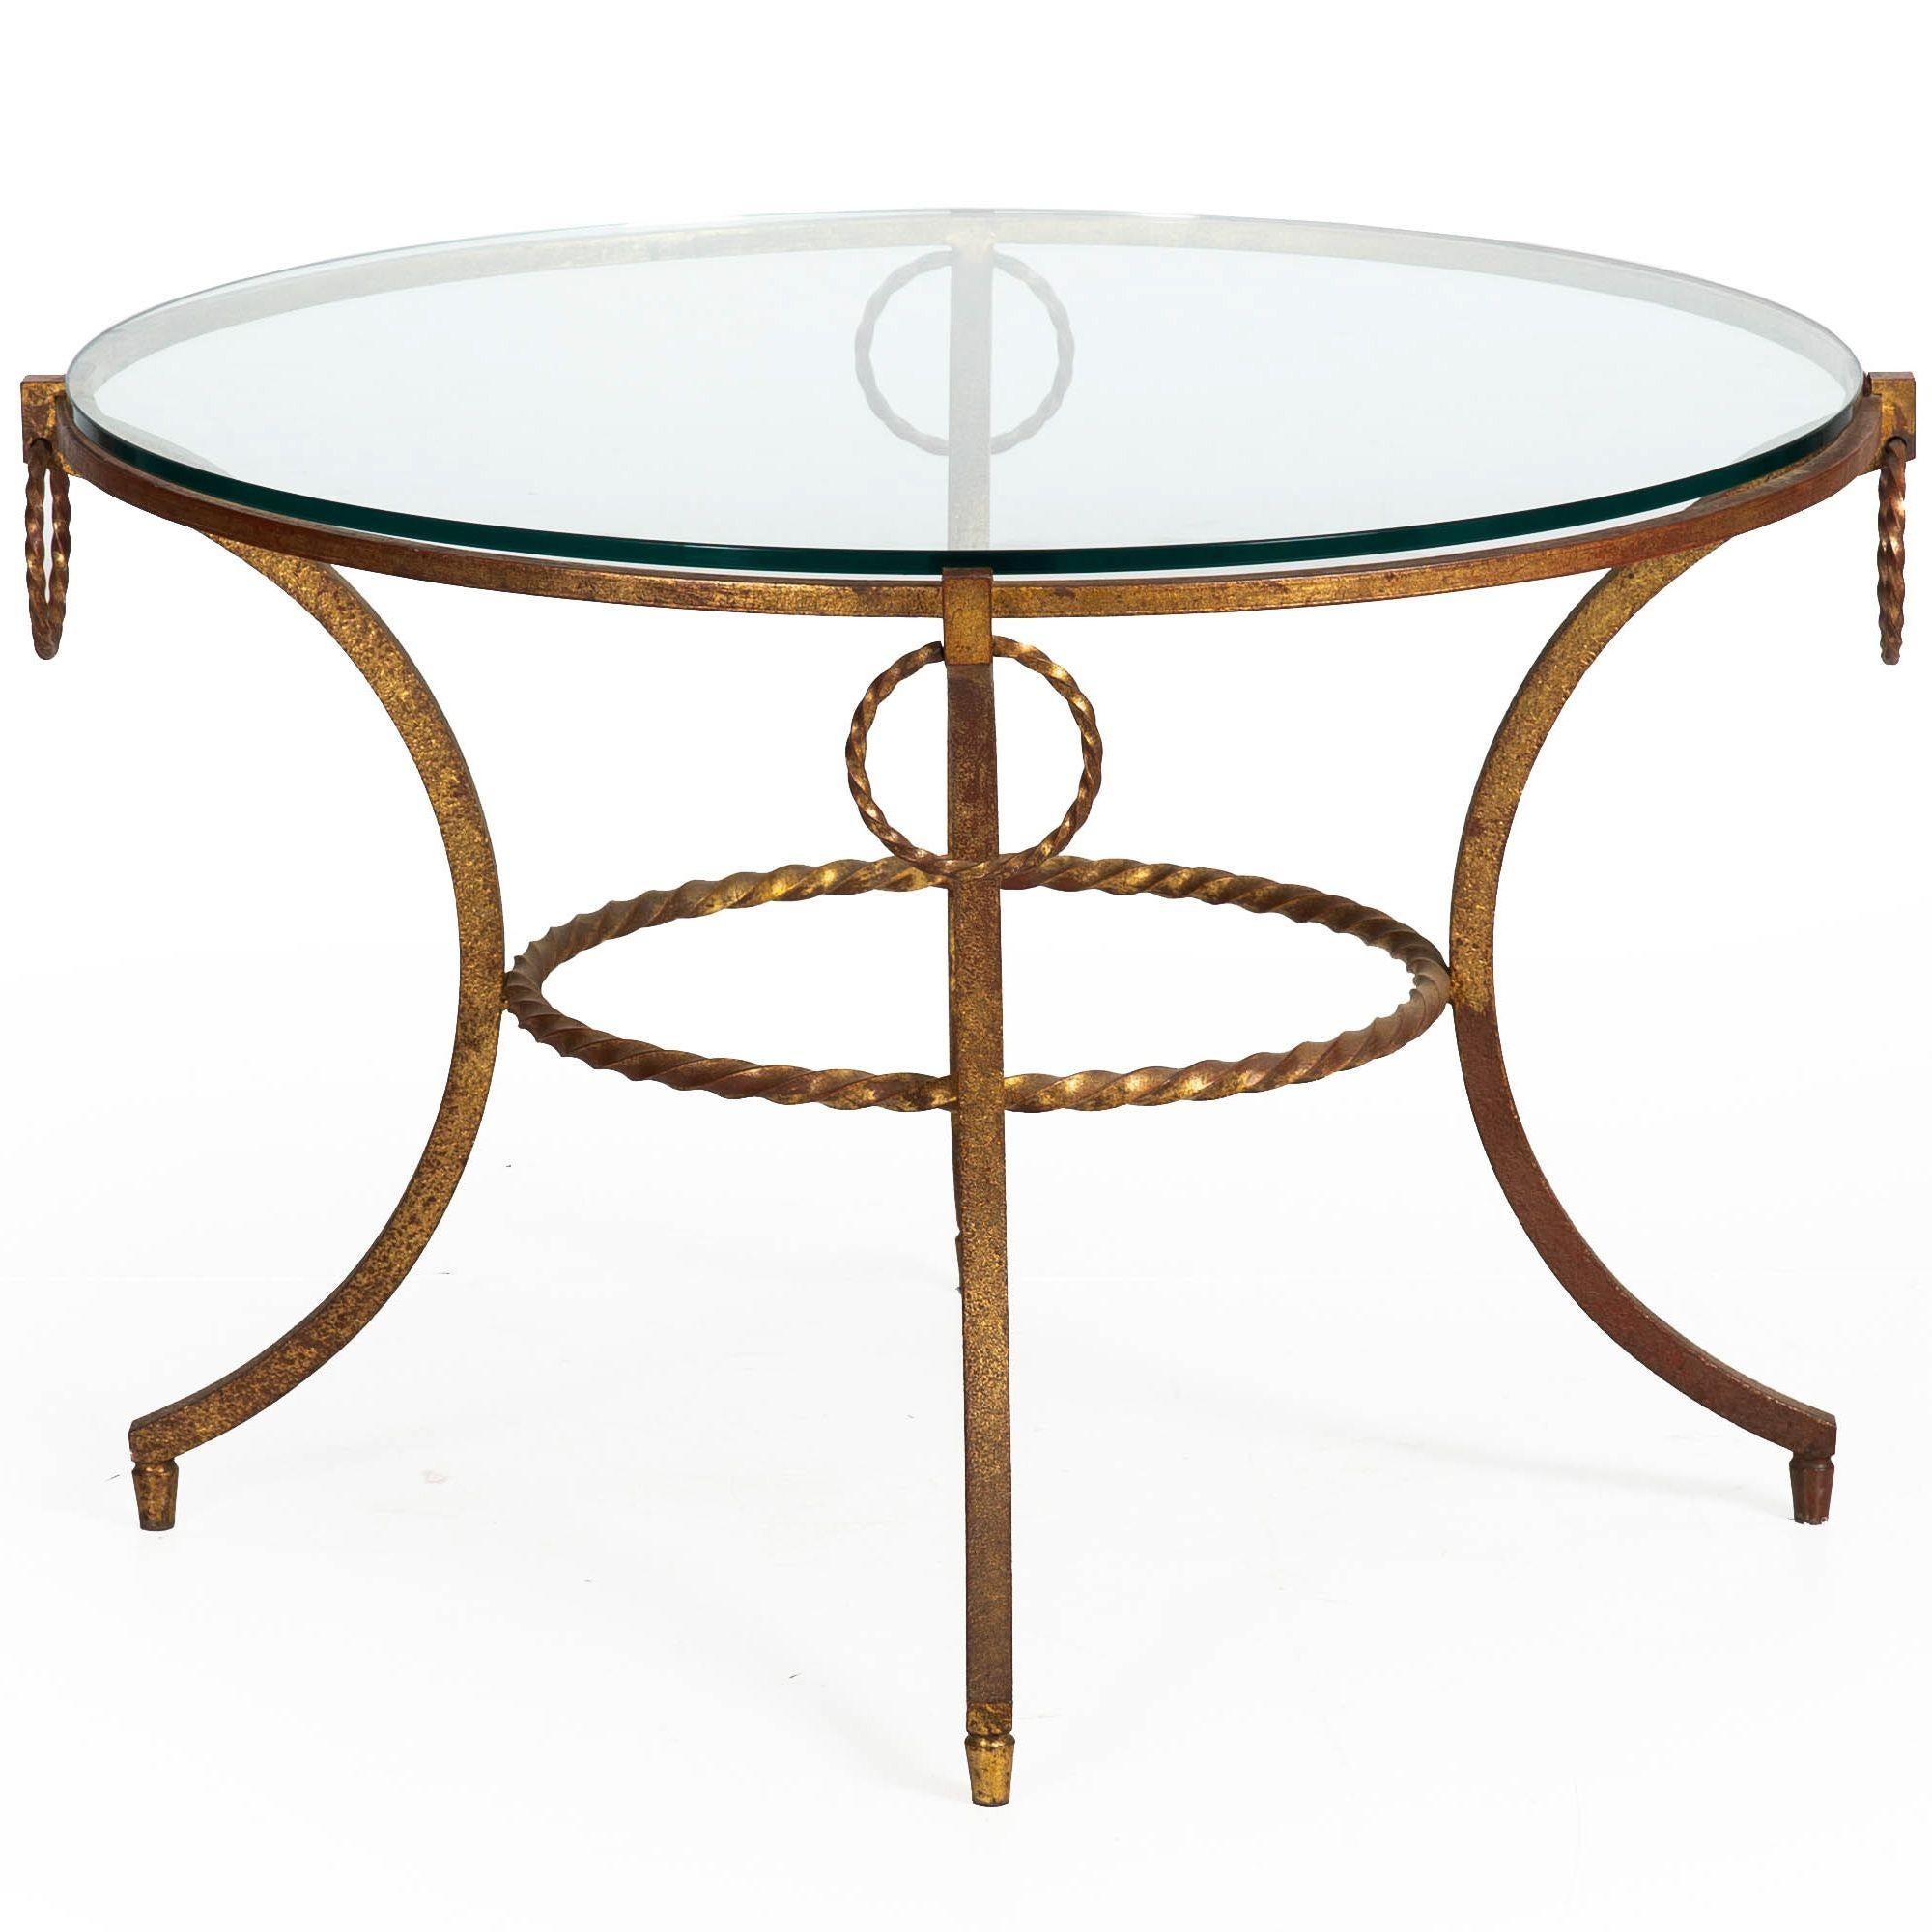 Gilt French Modernist Gilded Wrought-Iron & Glass Coffee Accent Table ca. 1950s For Sale